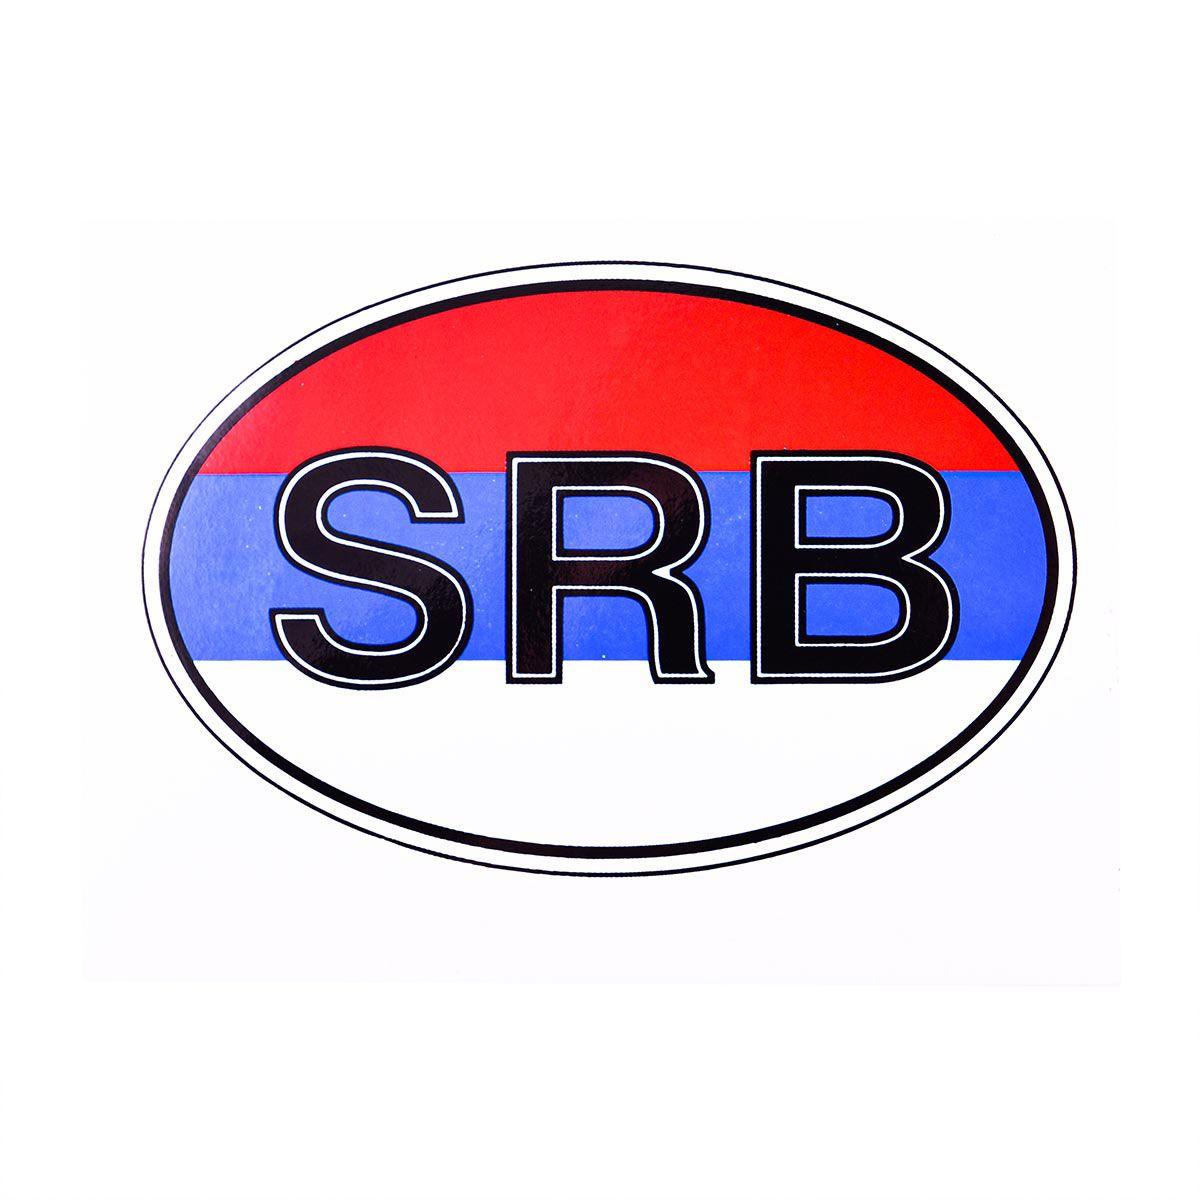 Selected image for CAR 888 ACCESSORIES Nalepnica, "SRB", 15 x 9 cm